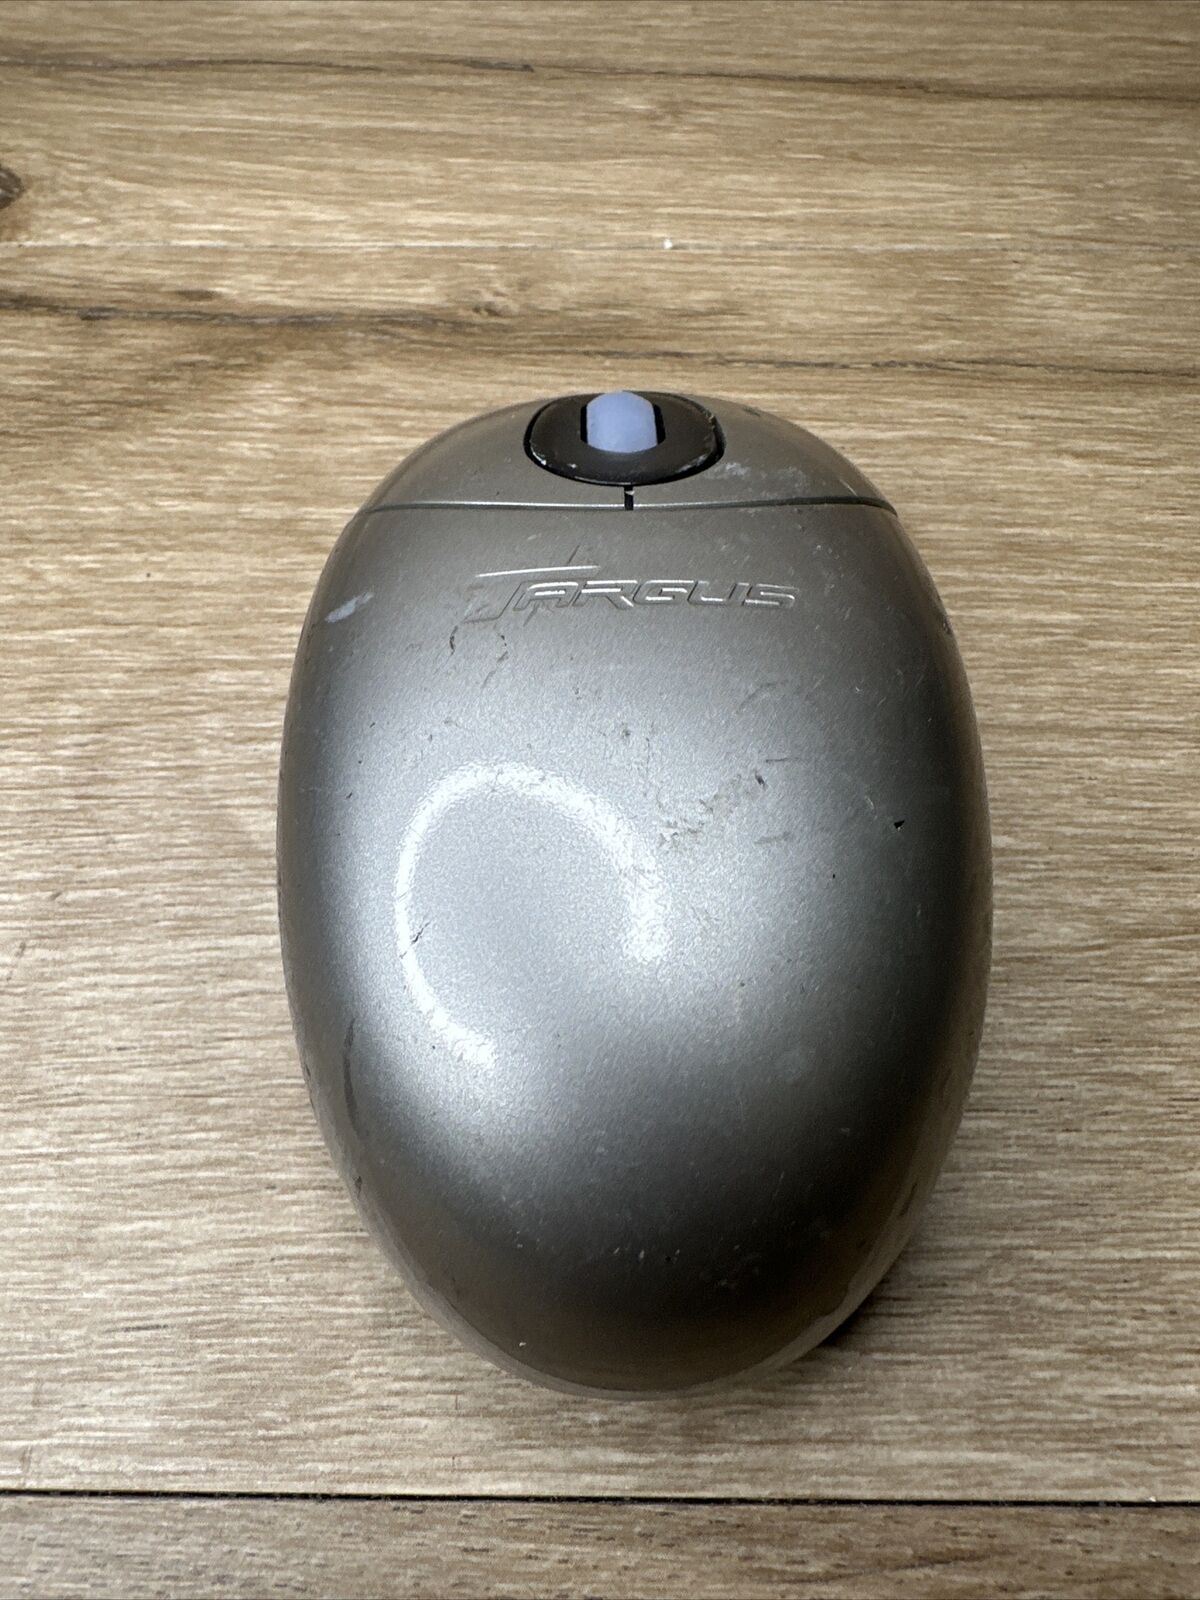 Targus Wirelss Optical Wheel Mouse NO USB Dongle Included Model PAUM005V2